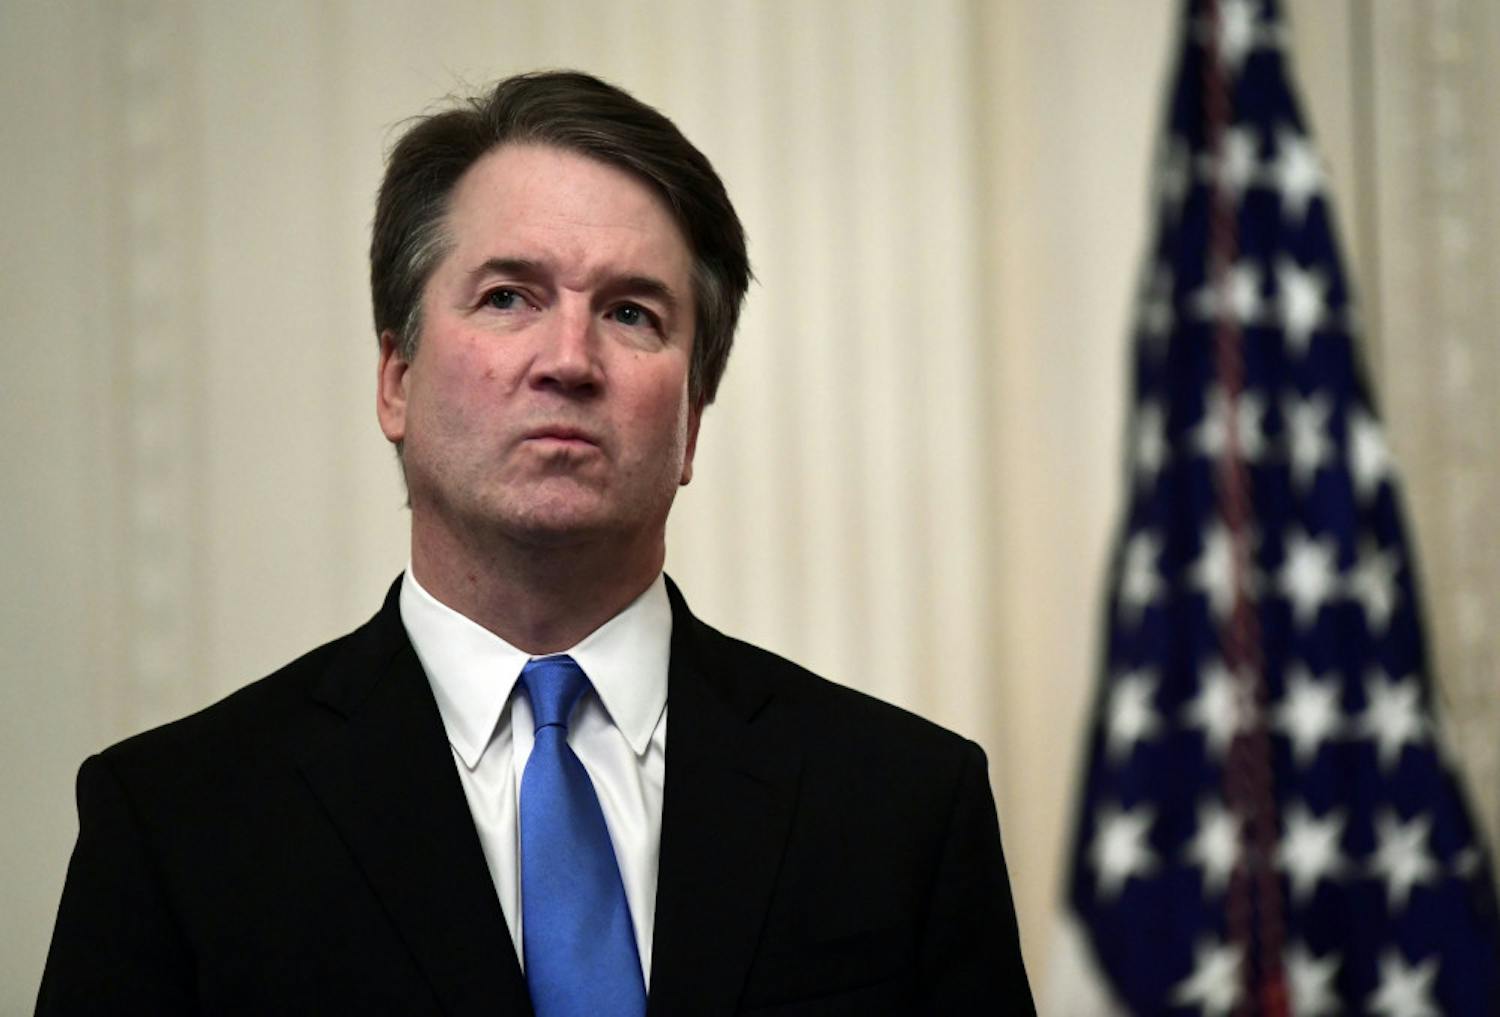 In this Oct. 8, 2018 photo, Supreme Court Justice Brett Kavanaugh stands before a ceremonial swearing-in in the East Room of the White House in Washington. At least two Democratic presidential candidates, Kamala Harris and Kamala Harris are calling for the impeachment of Supreme Court Justice Brett Kavanaugh in the face of a new, uninvestigated, allegation of sexual impropriety when he was in college. (AP Photo/Susan Walsh, File)